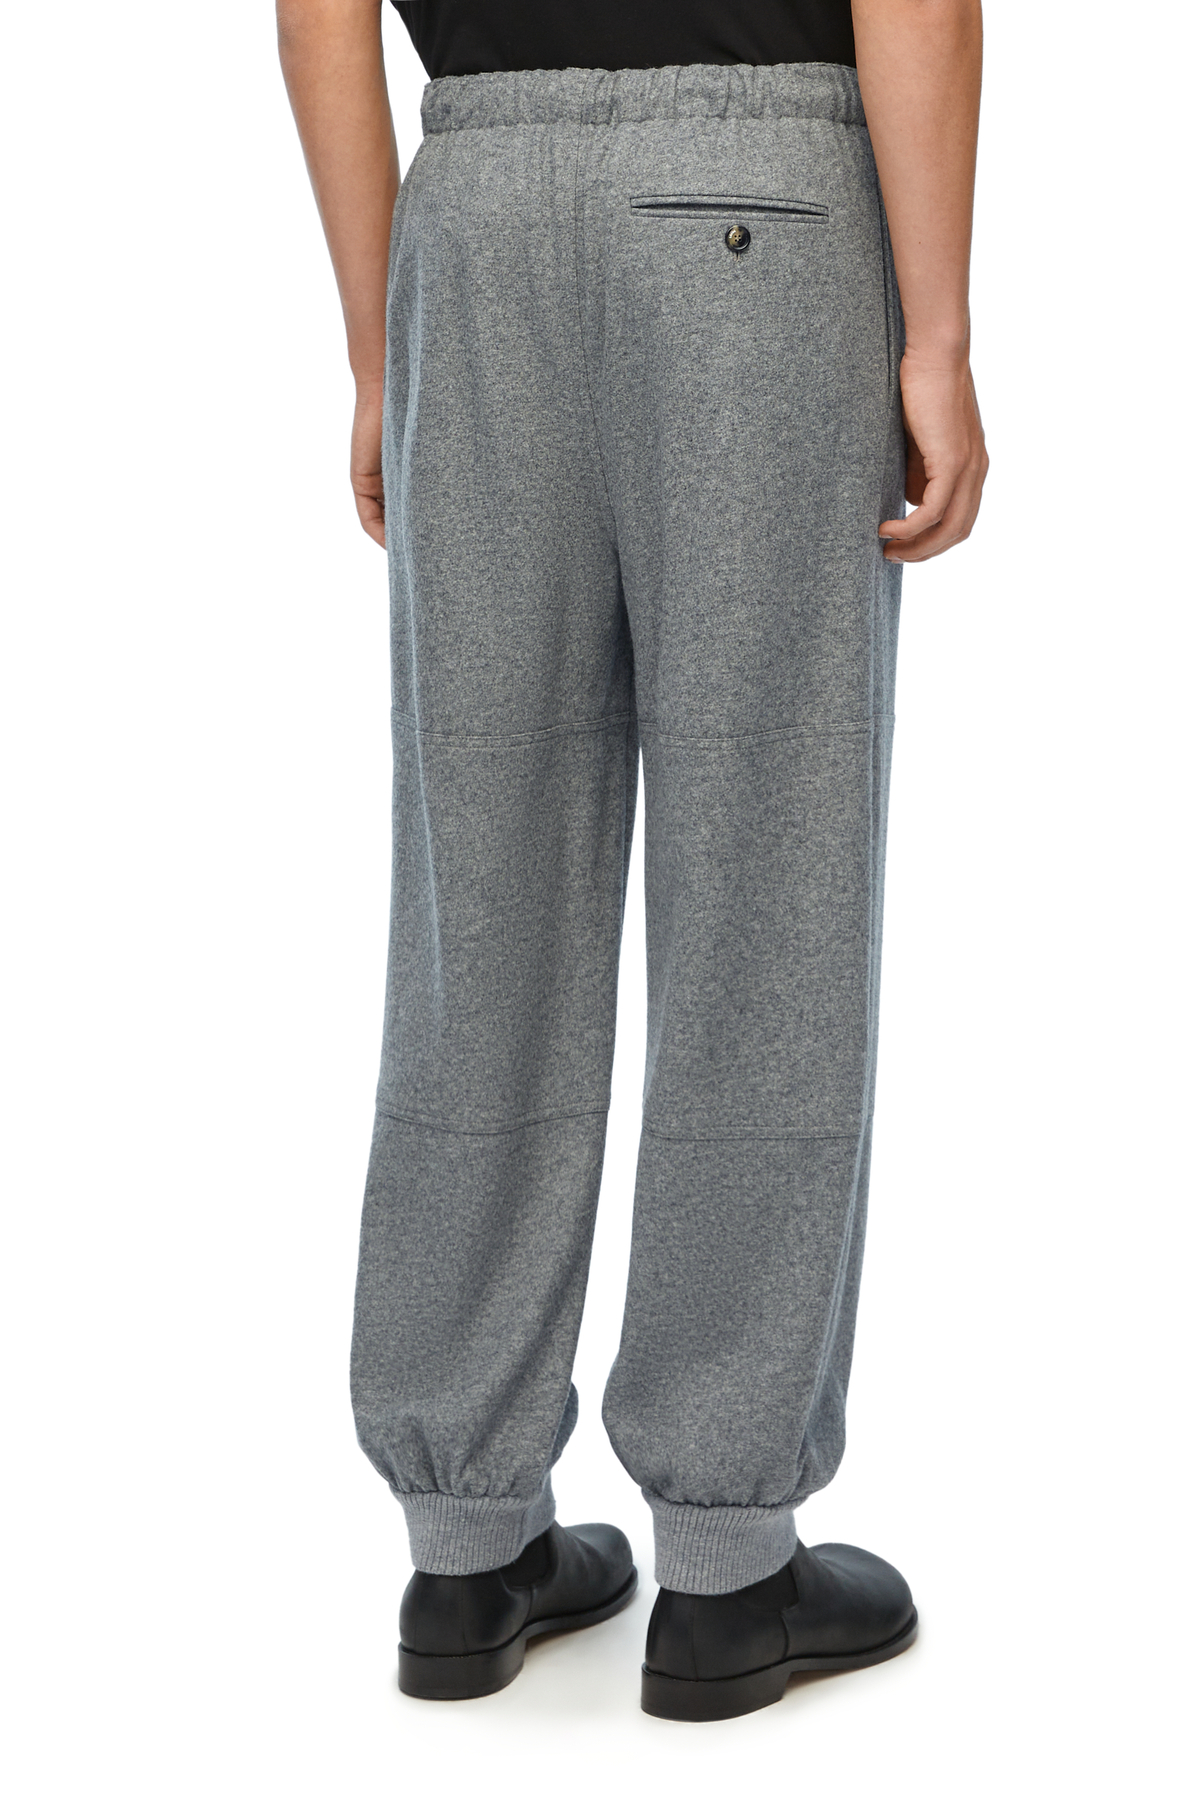 Trousers in wool and cashmere Grey Melange - LOEWE